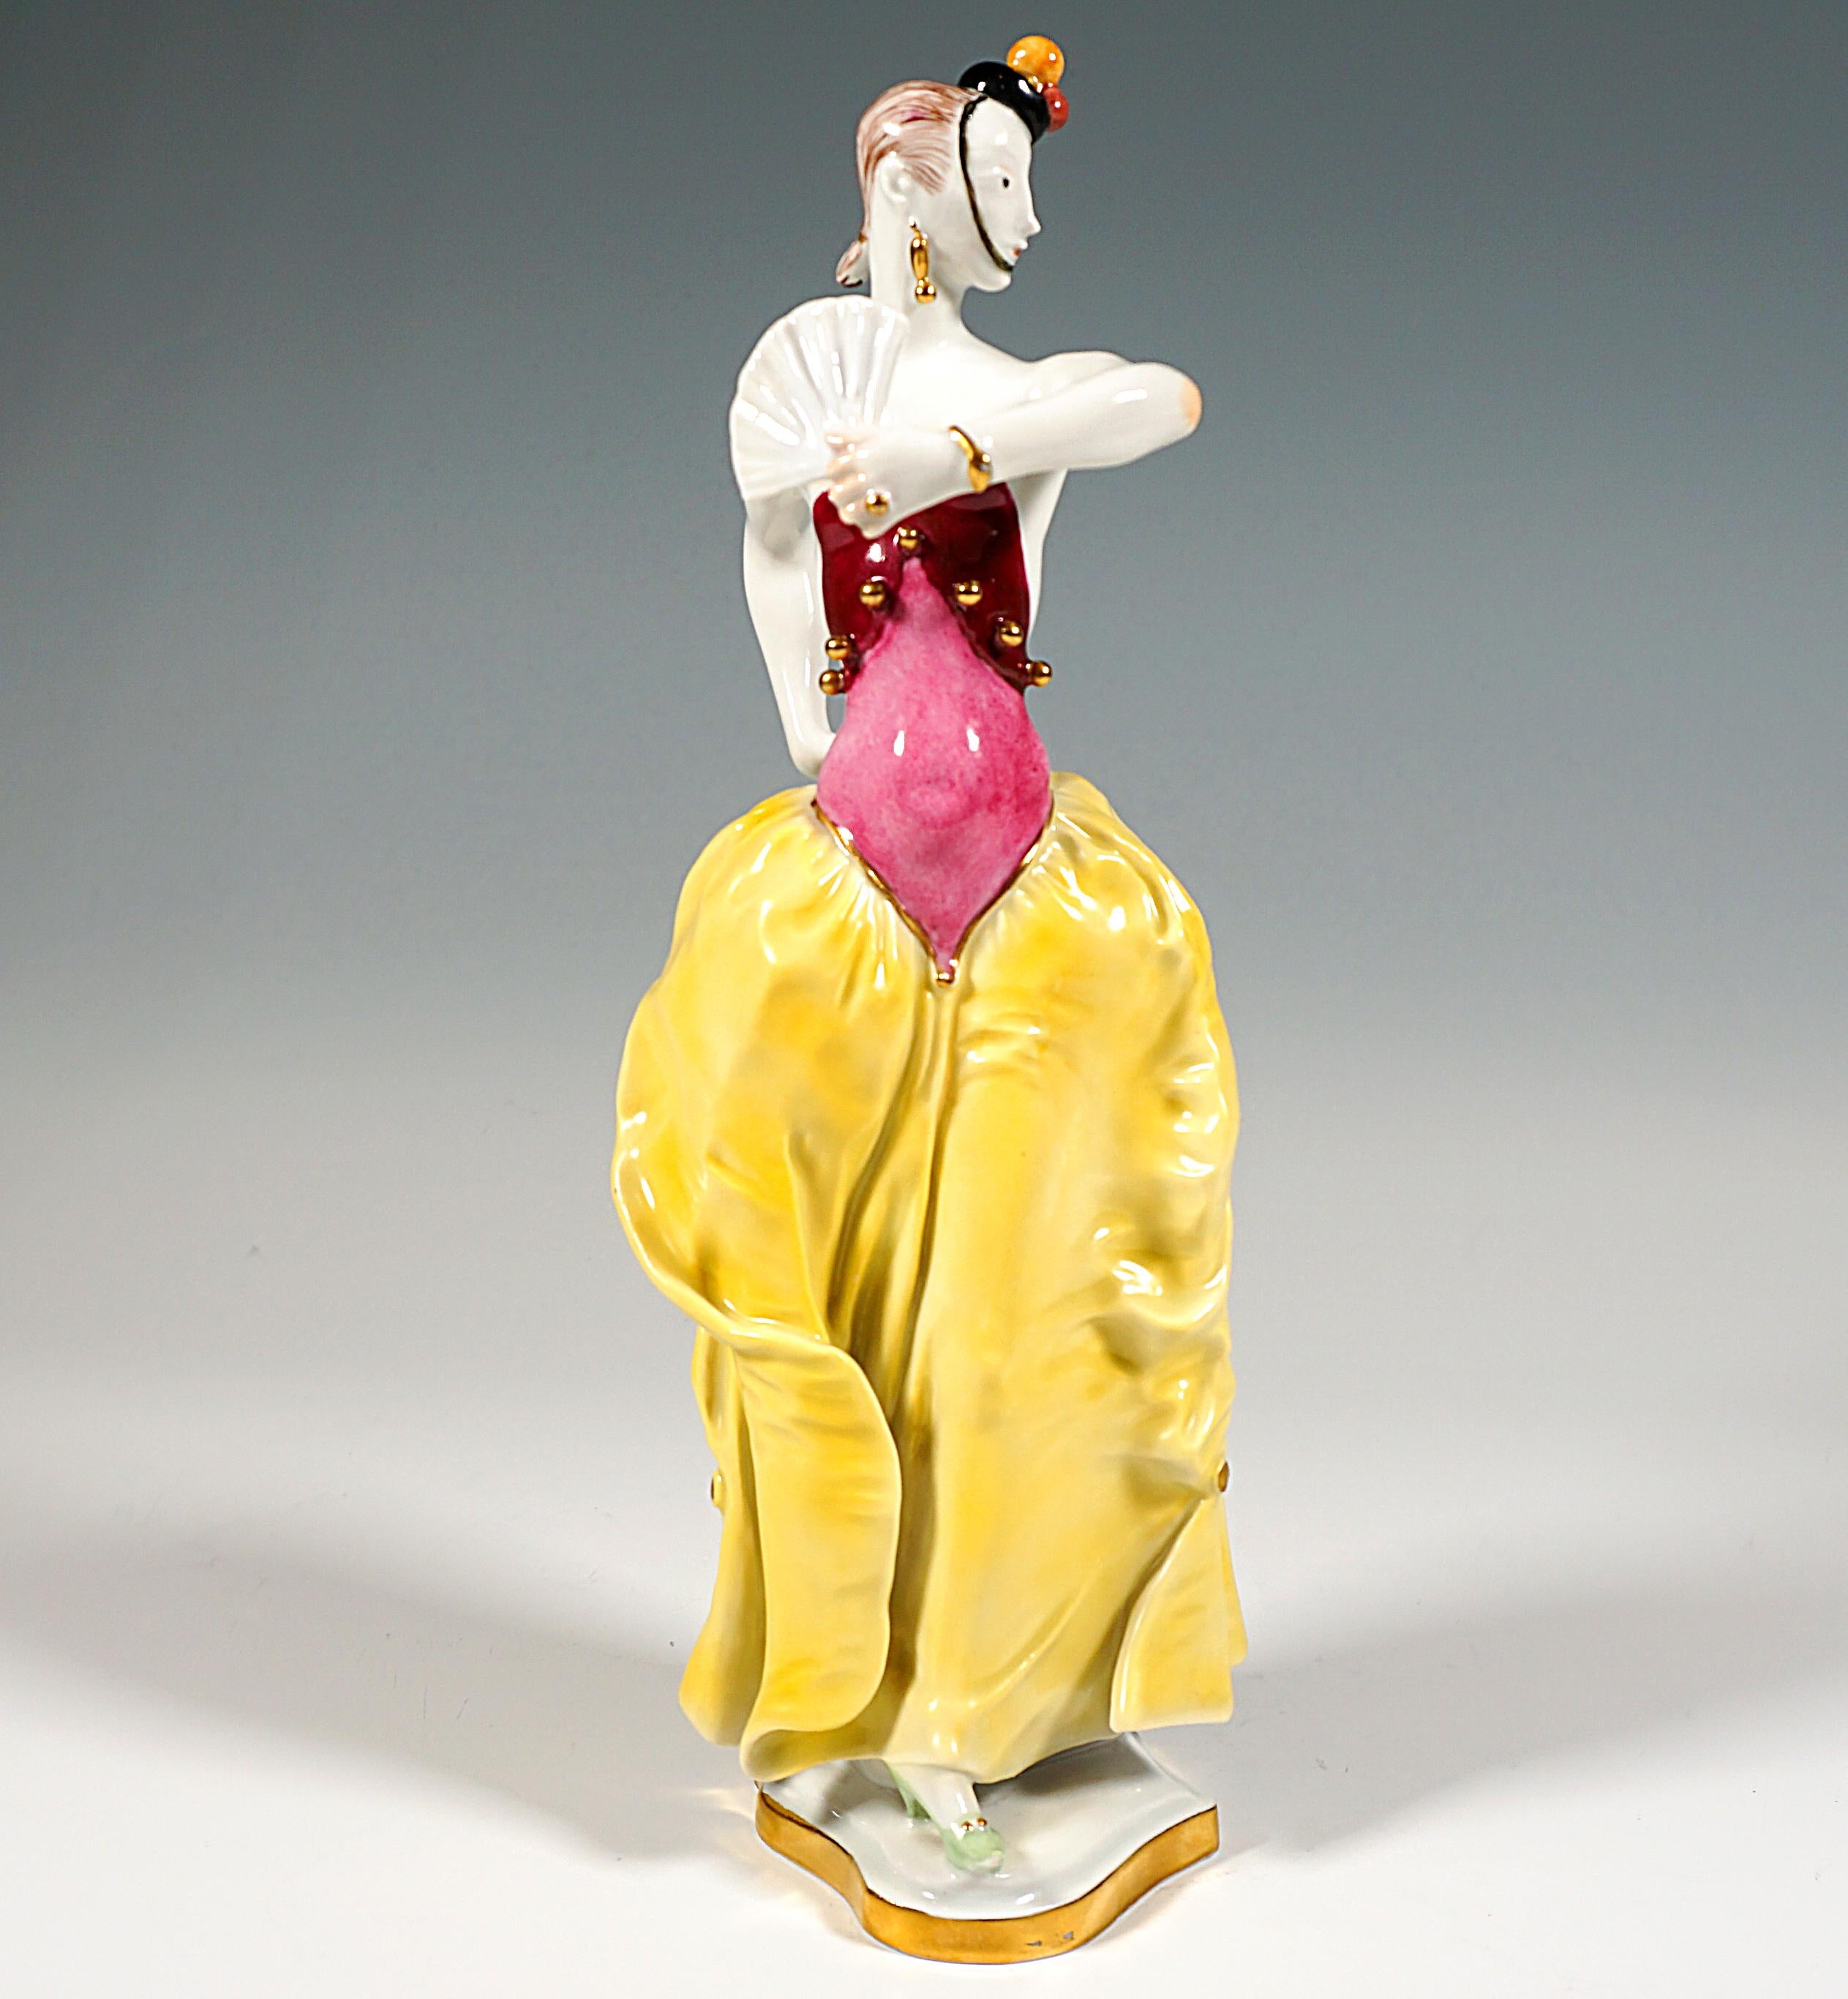 Exceptional Meissen Porcelain Figurine:
Dancer in a skirt puffed out around the hips with a tight, strapless and backless top with golden buttons, posing with a fan and castanet, a small hat with tassels with a hatband resting on her chin pushed low